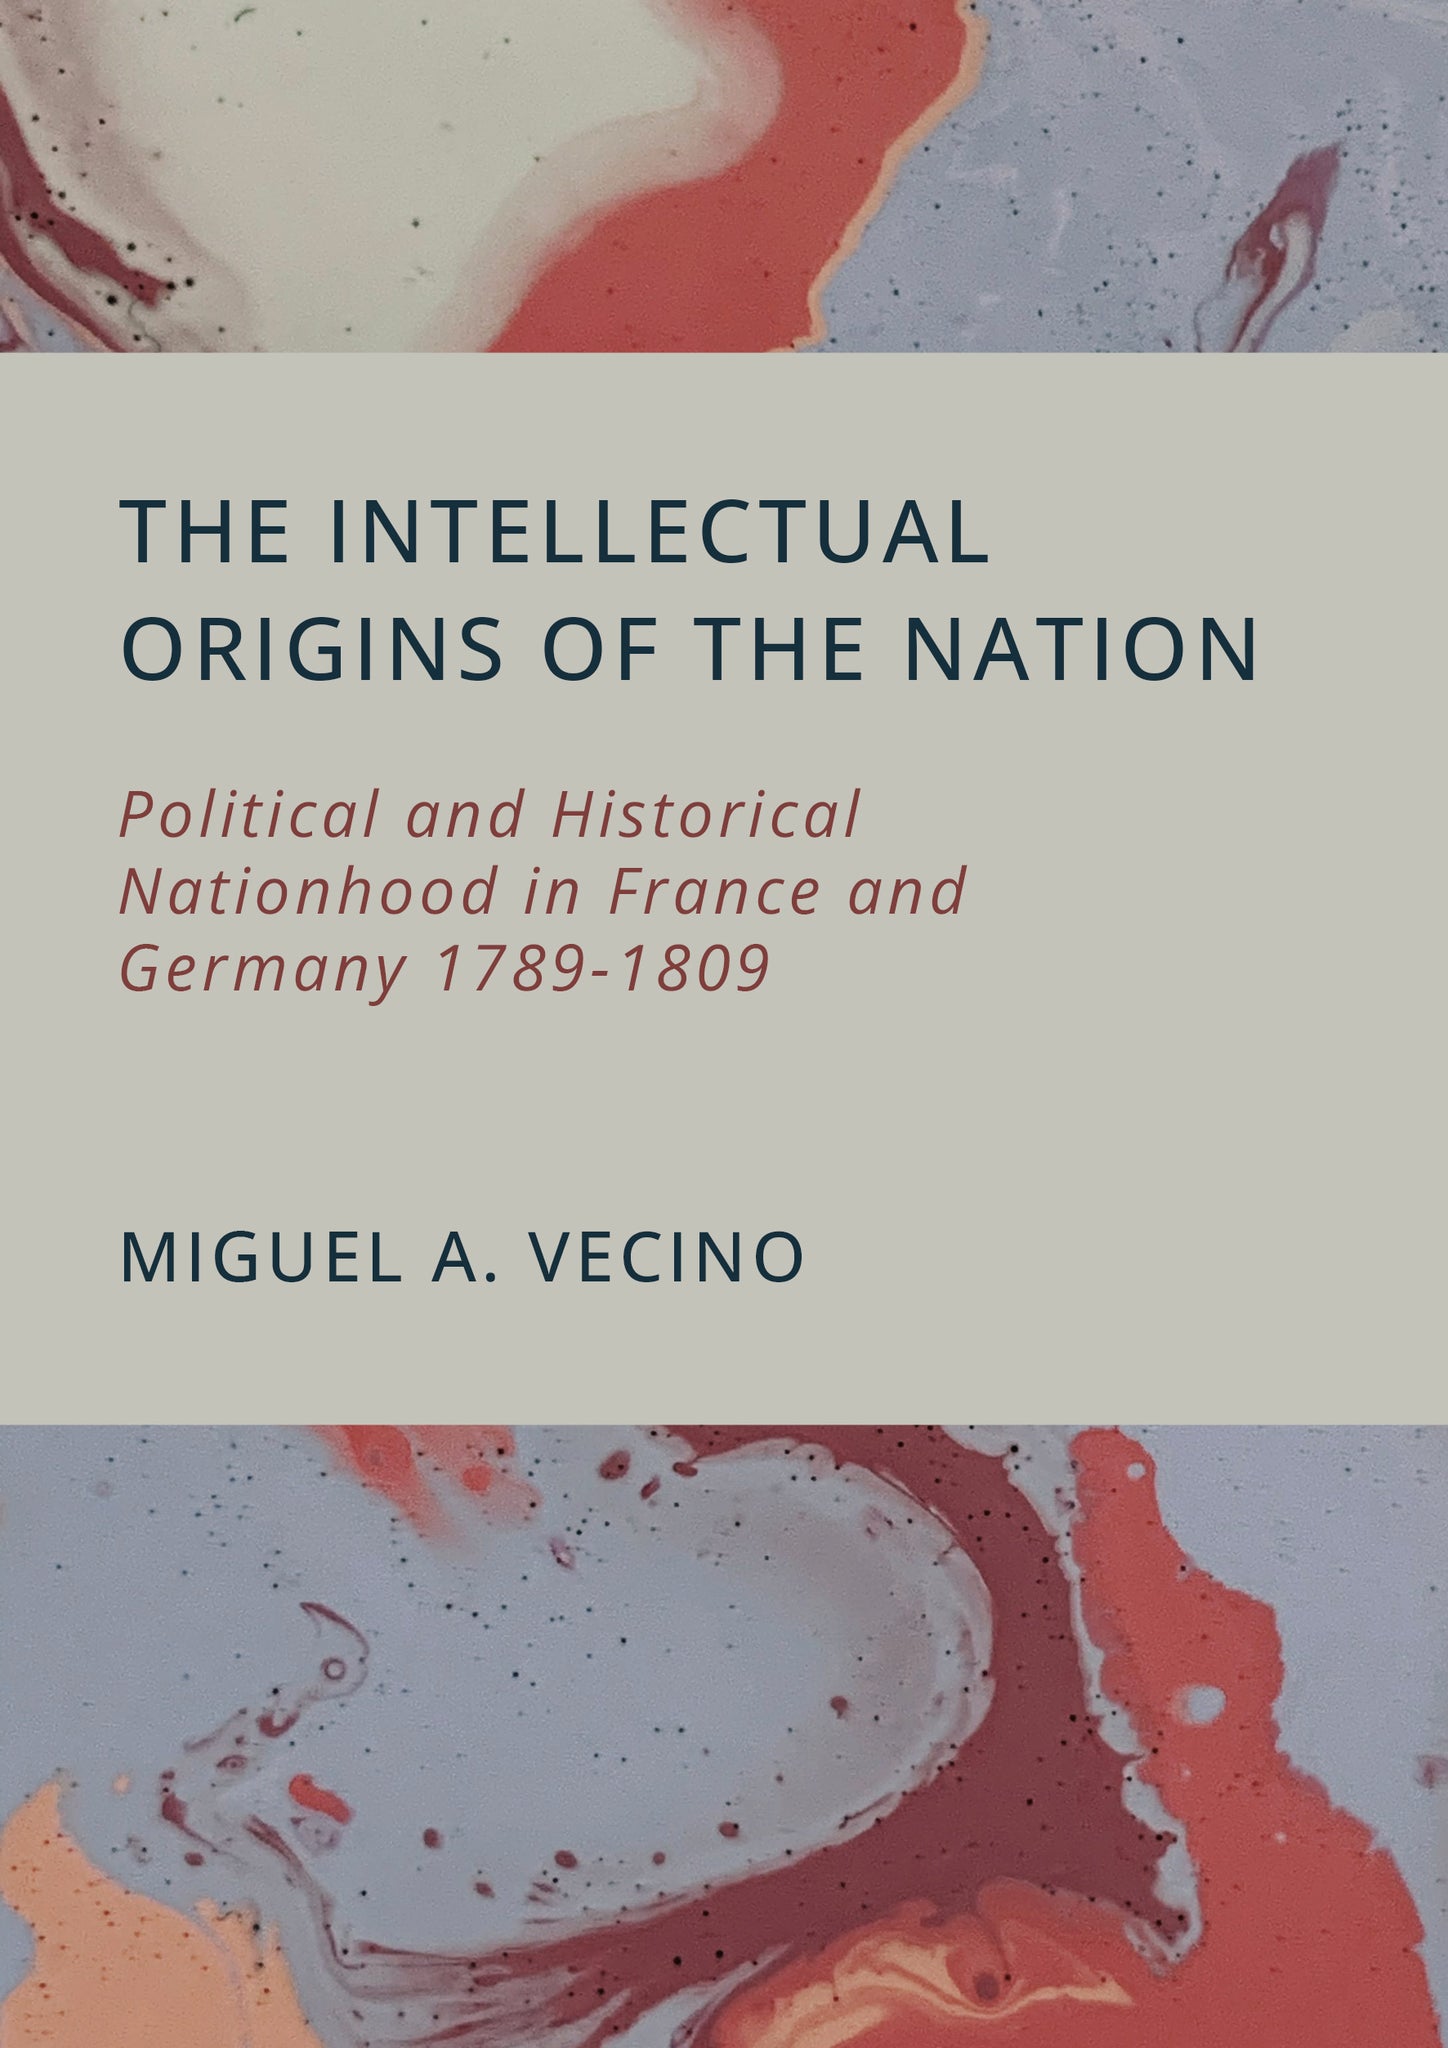 The Intellectual Origins of the Nation: Political and Historical Nationhood in France and Germany 1789-1809